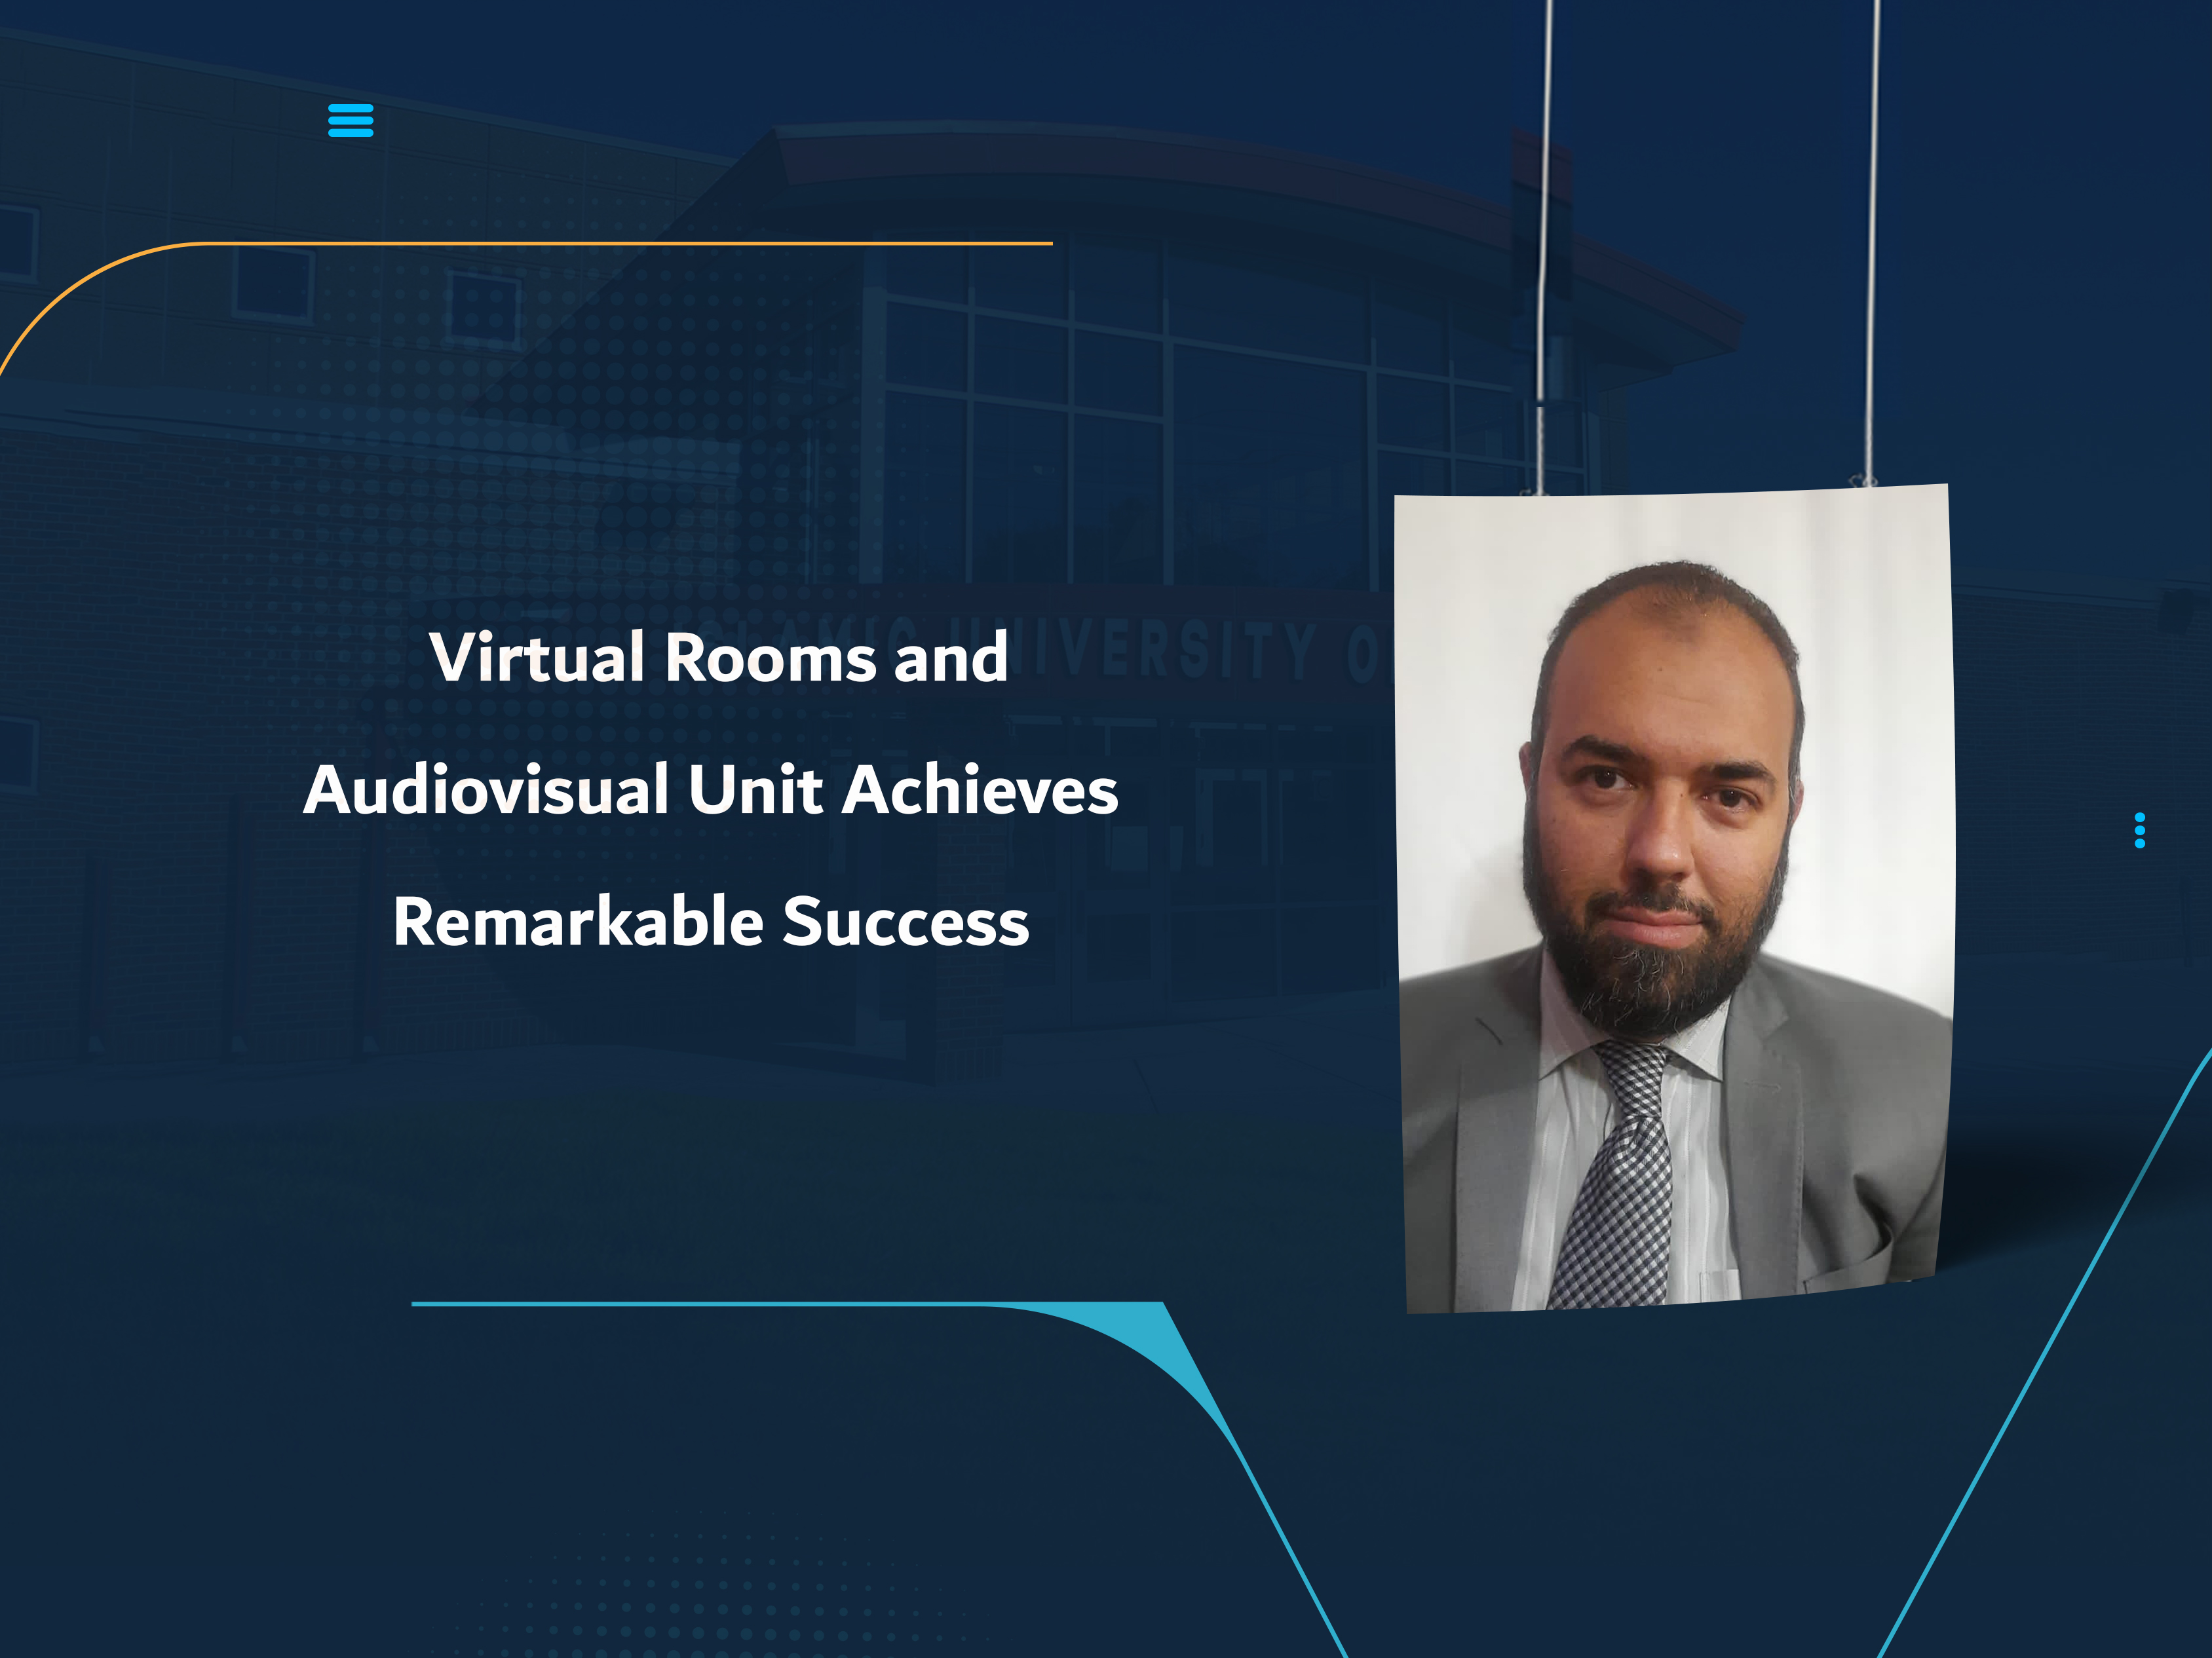 Virtual Rooms and Audiovisual Unit Achieves Remarkable Success